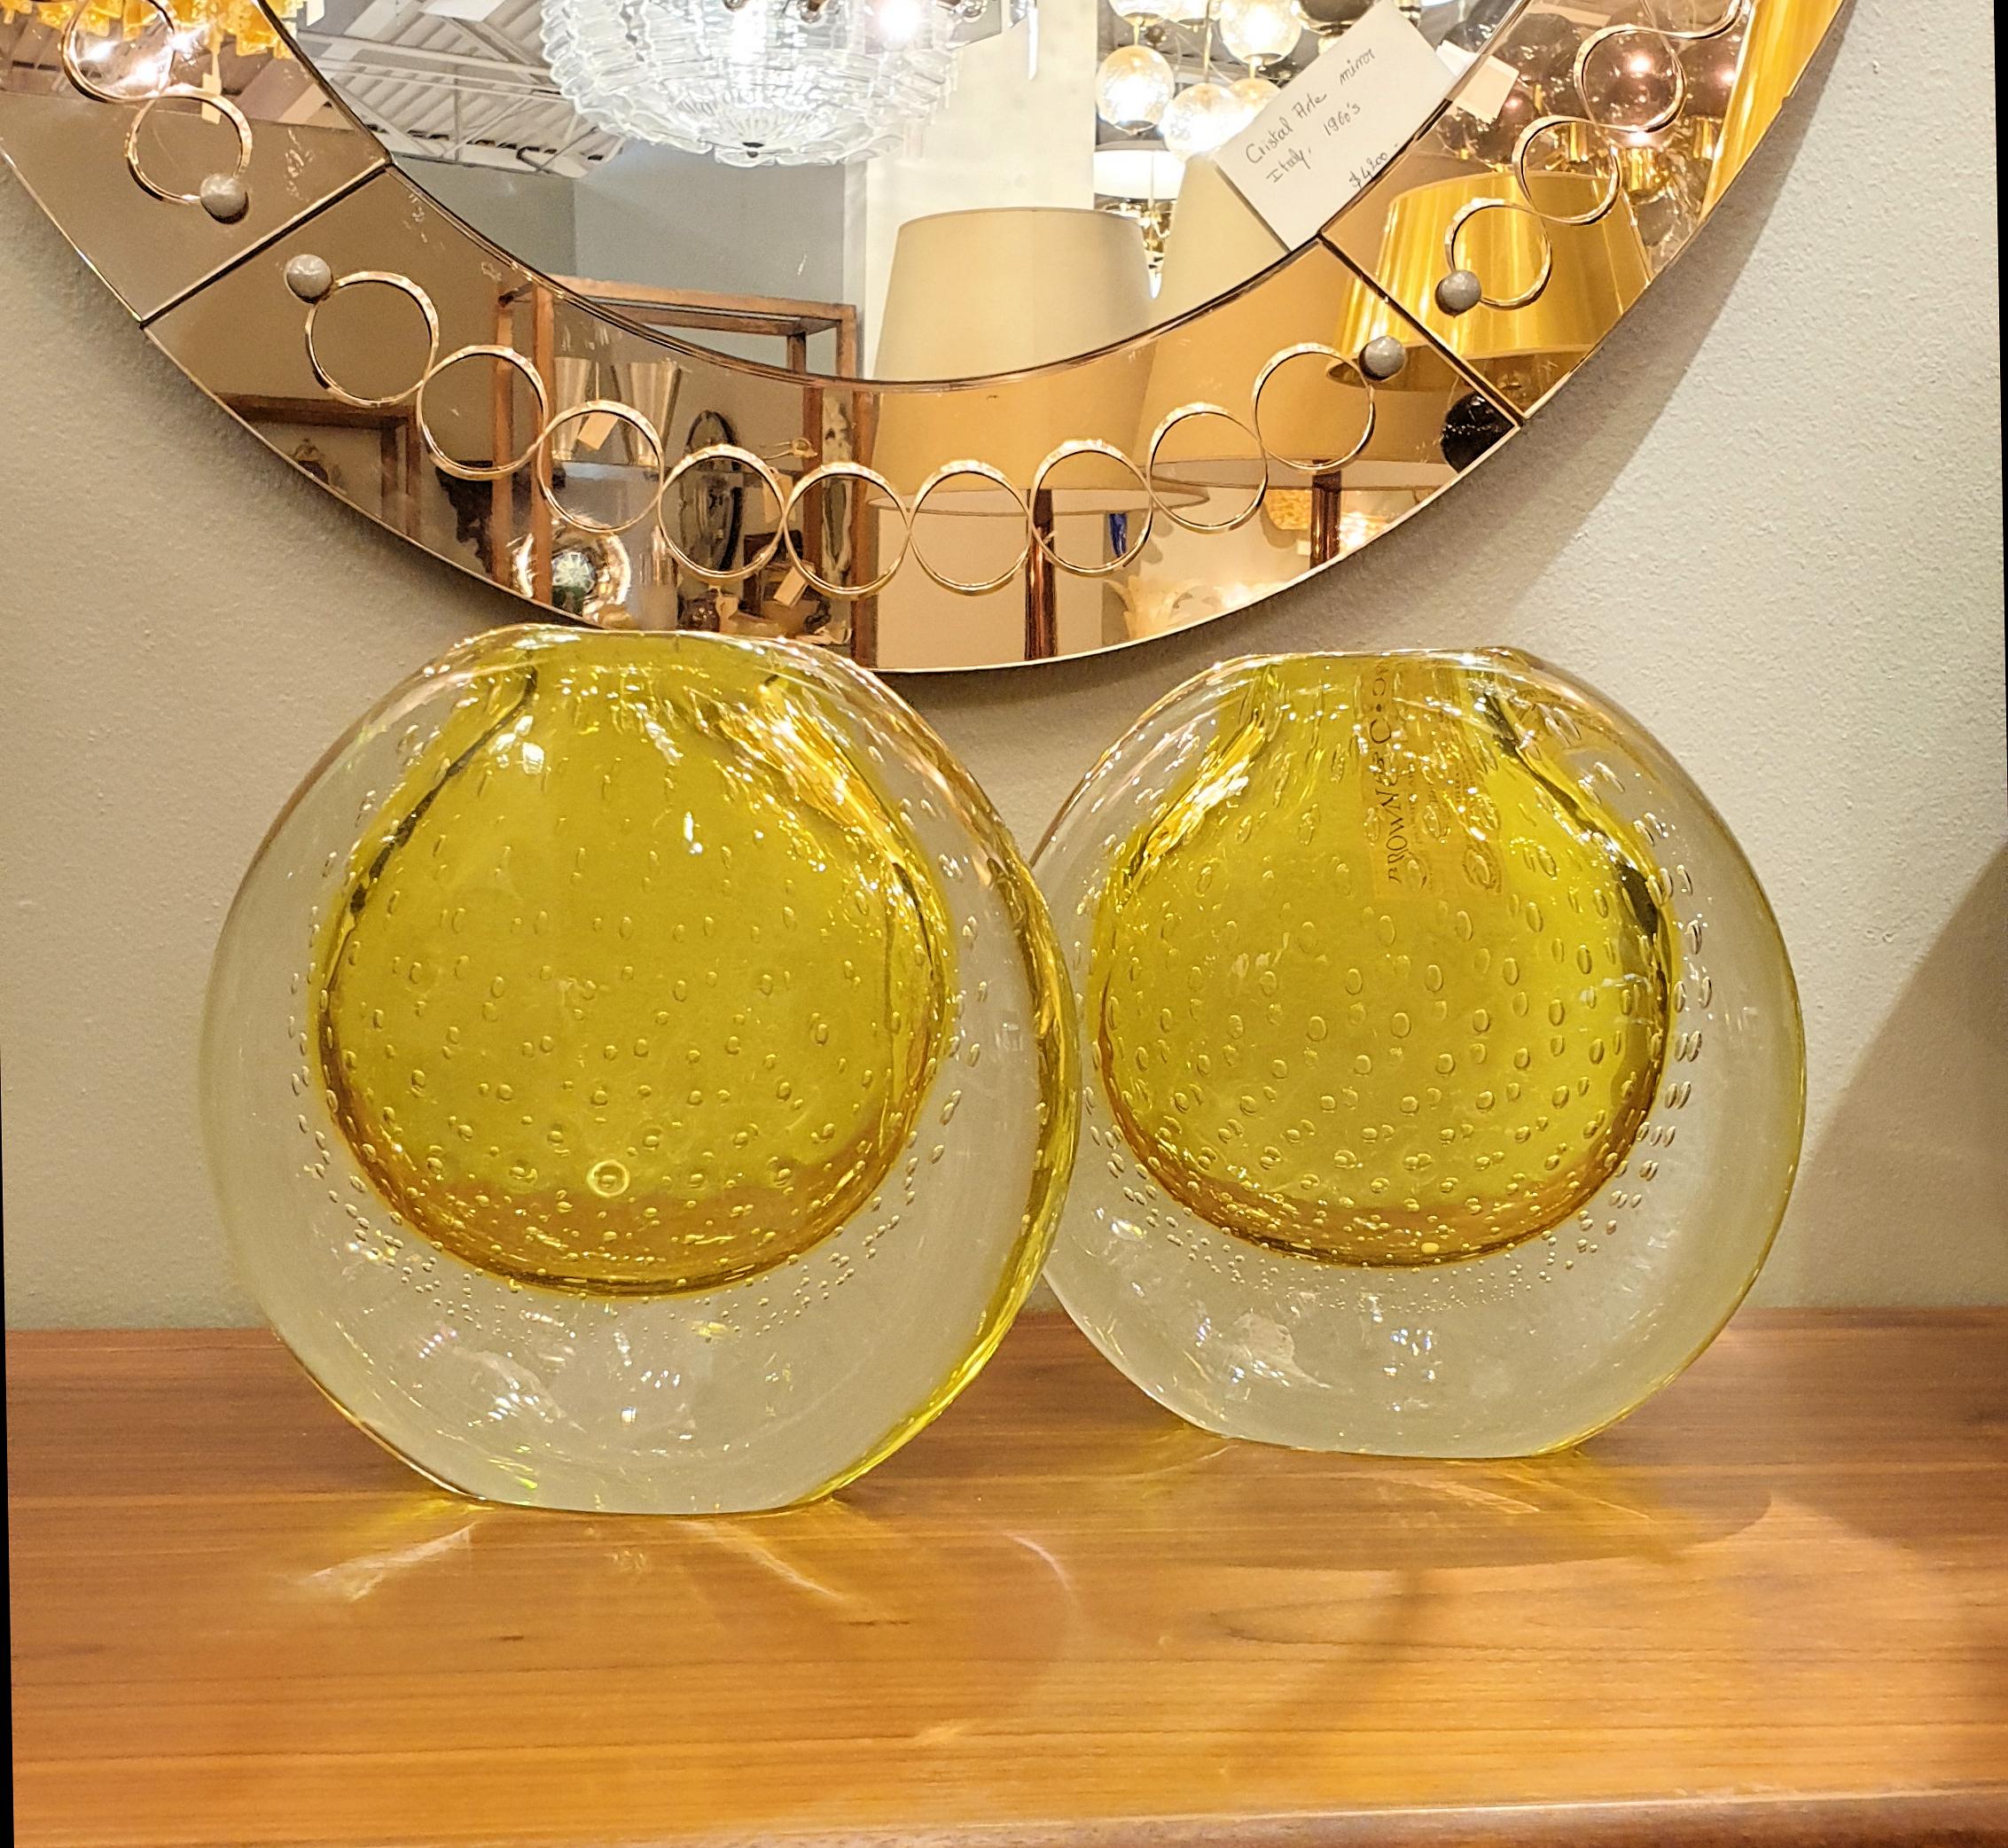 Pair of round Mid-Century Modern Murano glass vases, by Seguso, Italy, 1970s
The vintage pair of vases is made with the Sommerso technique: several layers of murano glass with contrasting colors and air bubbles inclusion.
For this pair of vases,